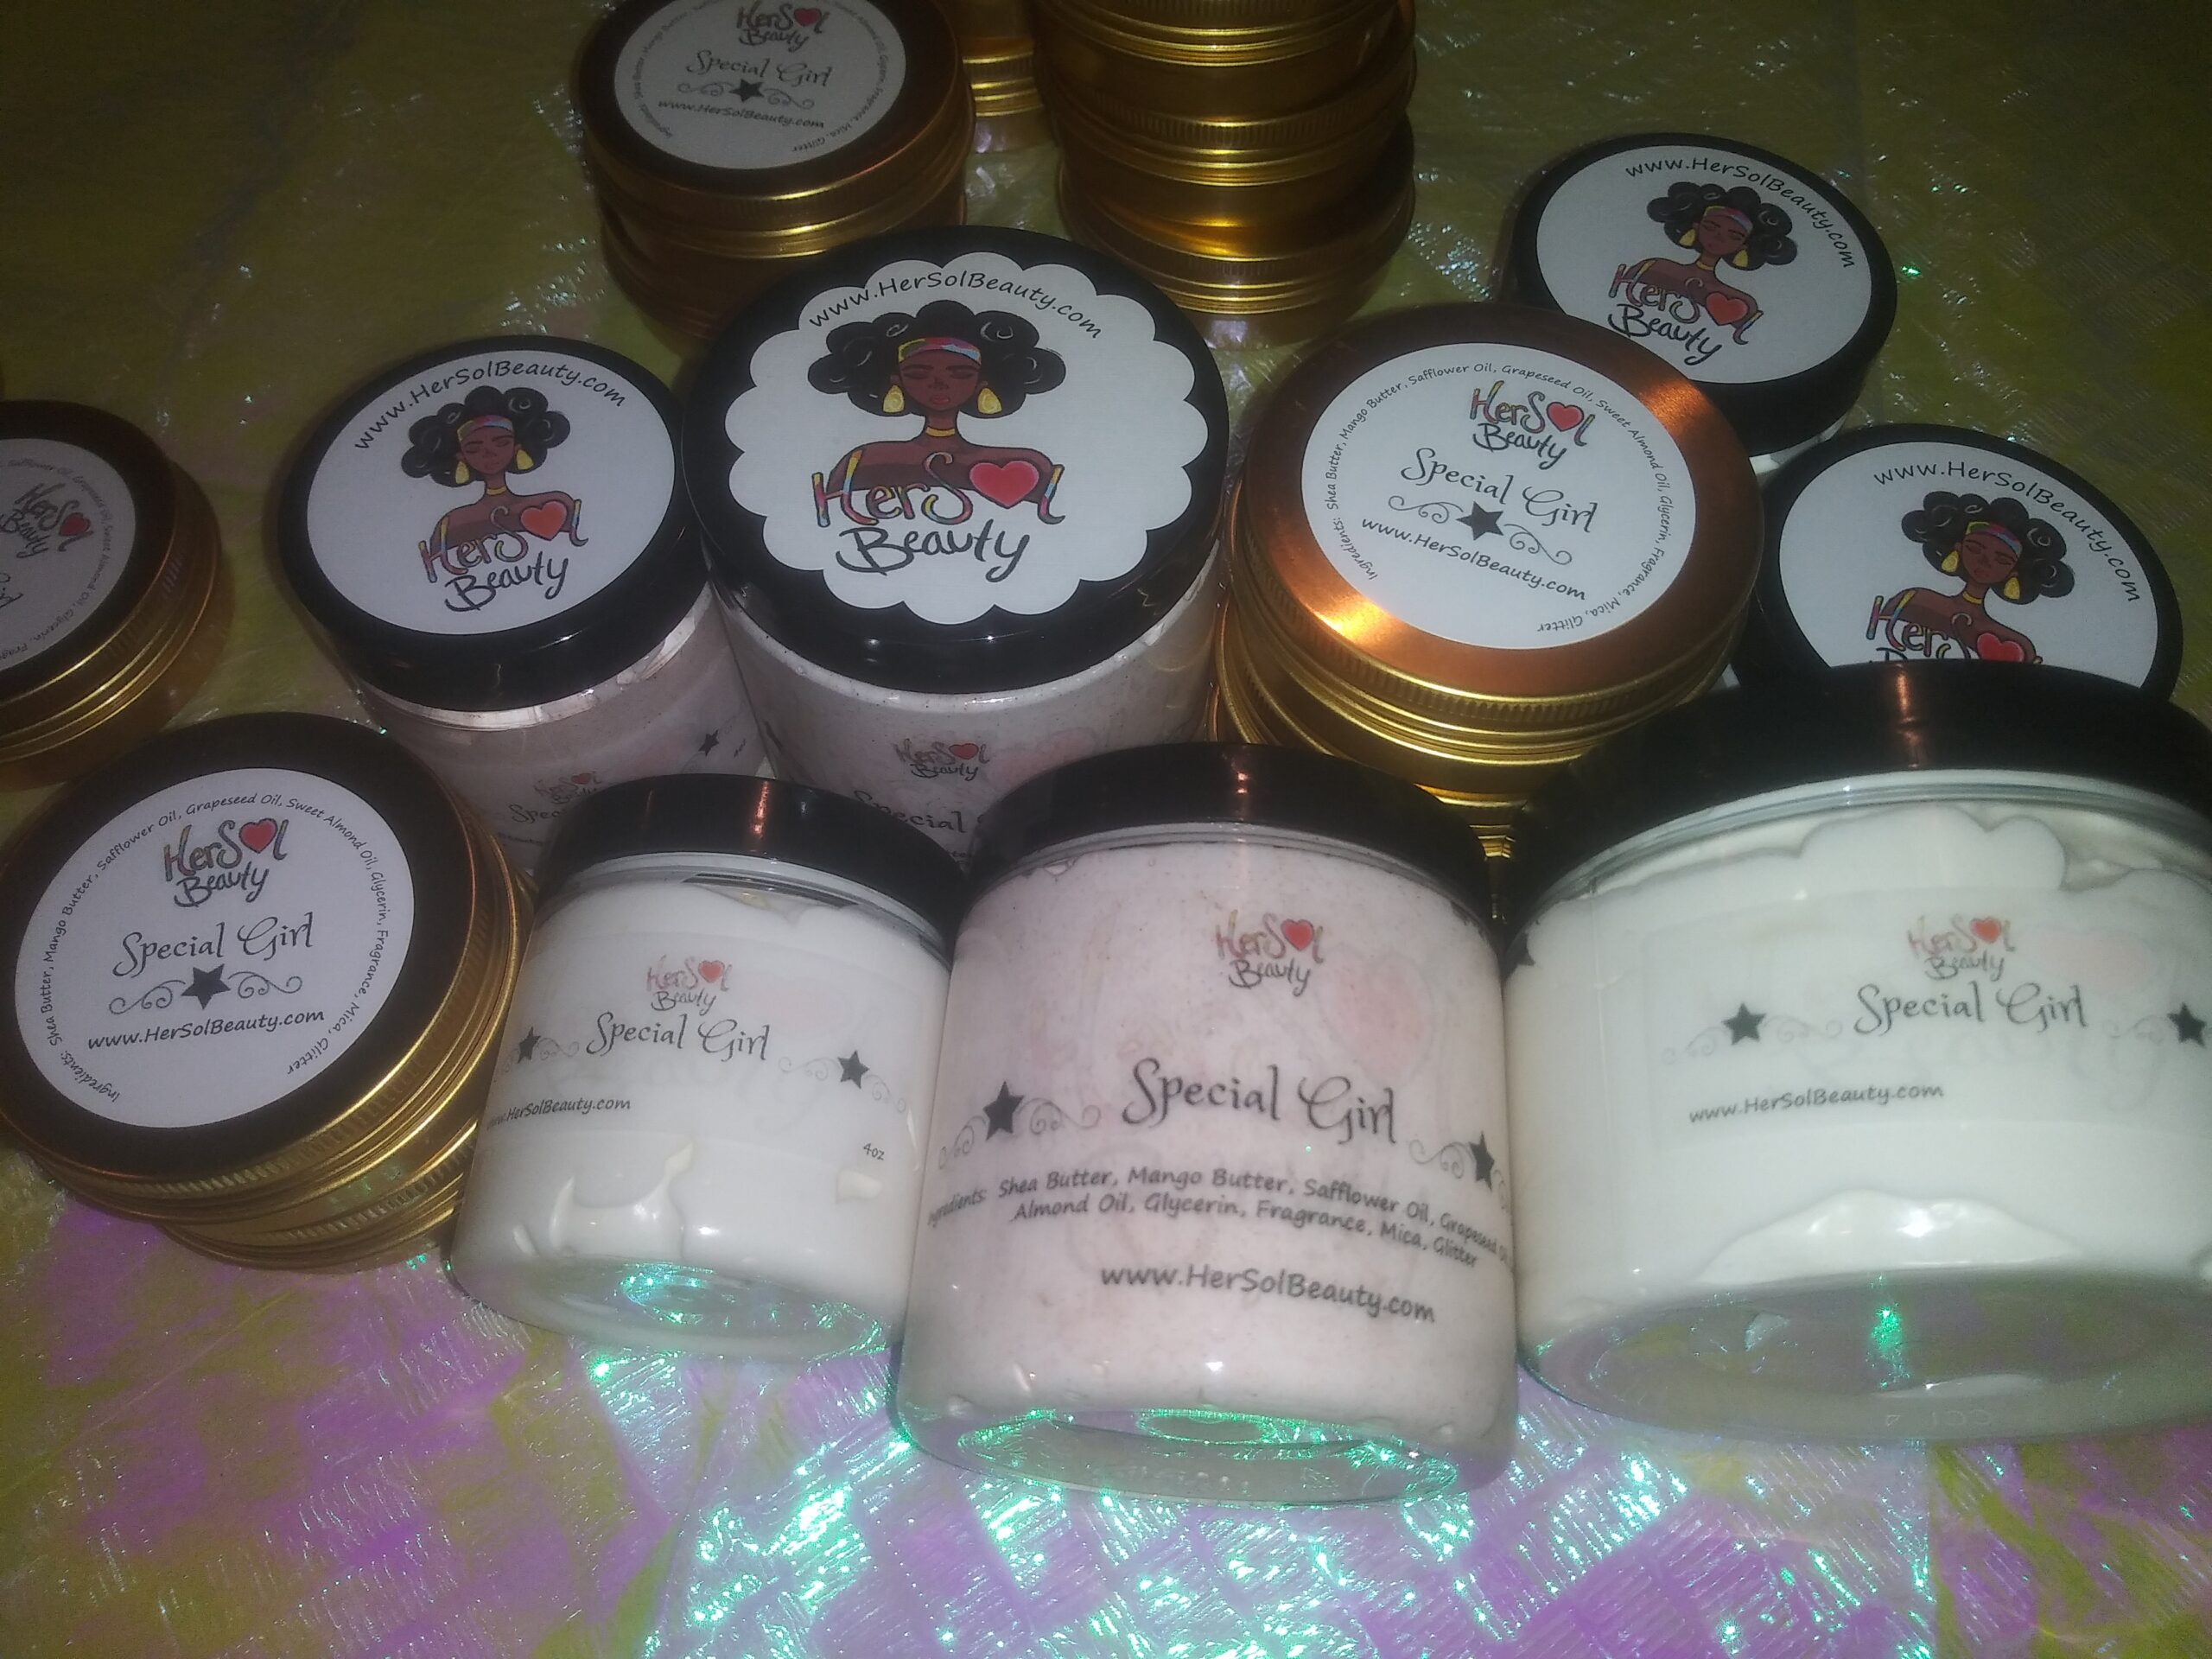 Special girl body butter